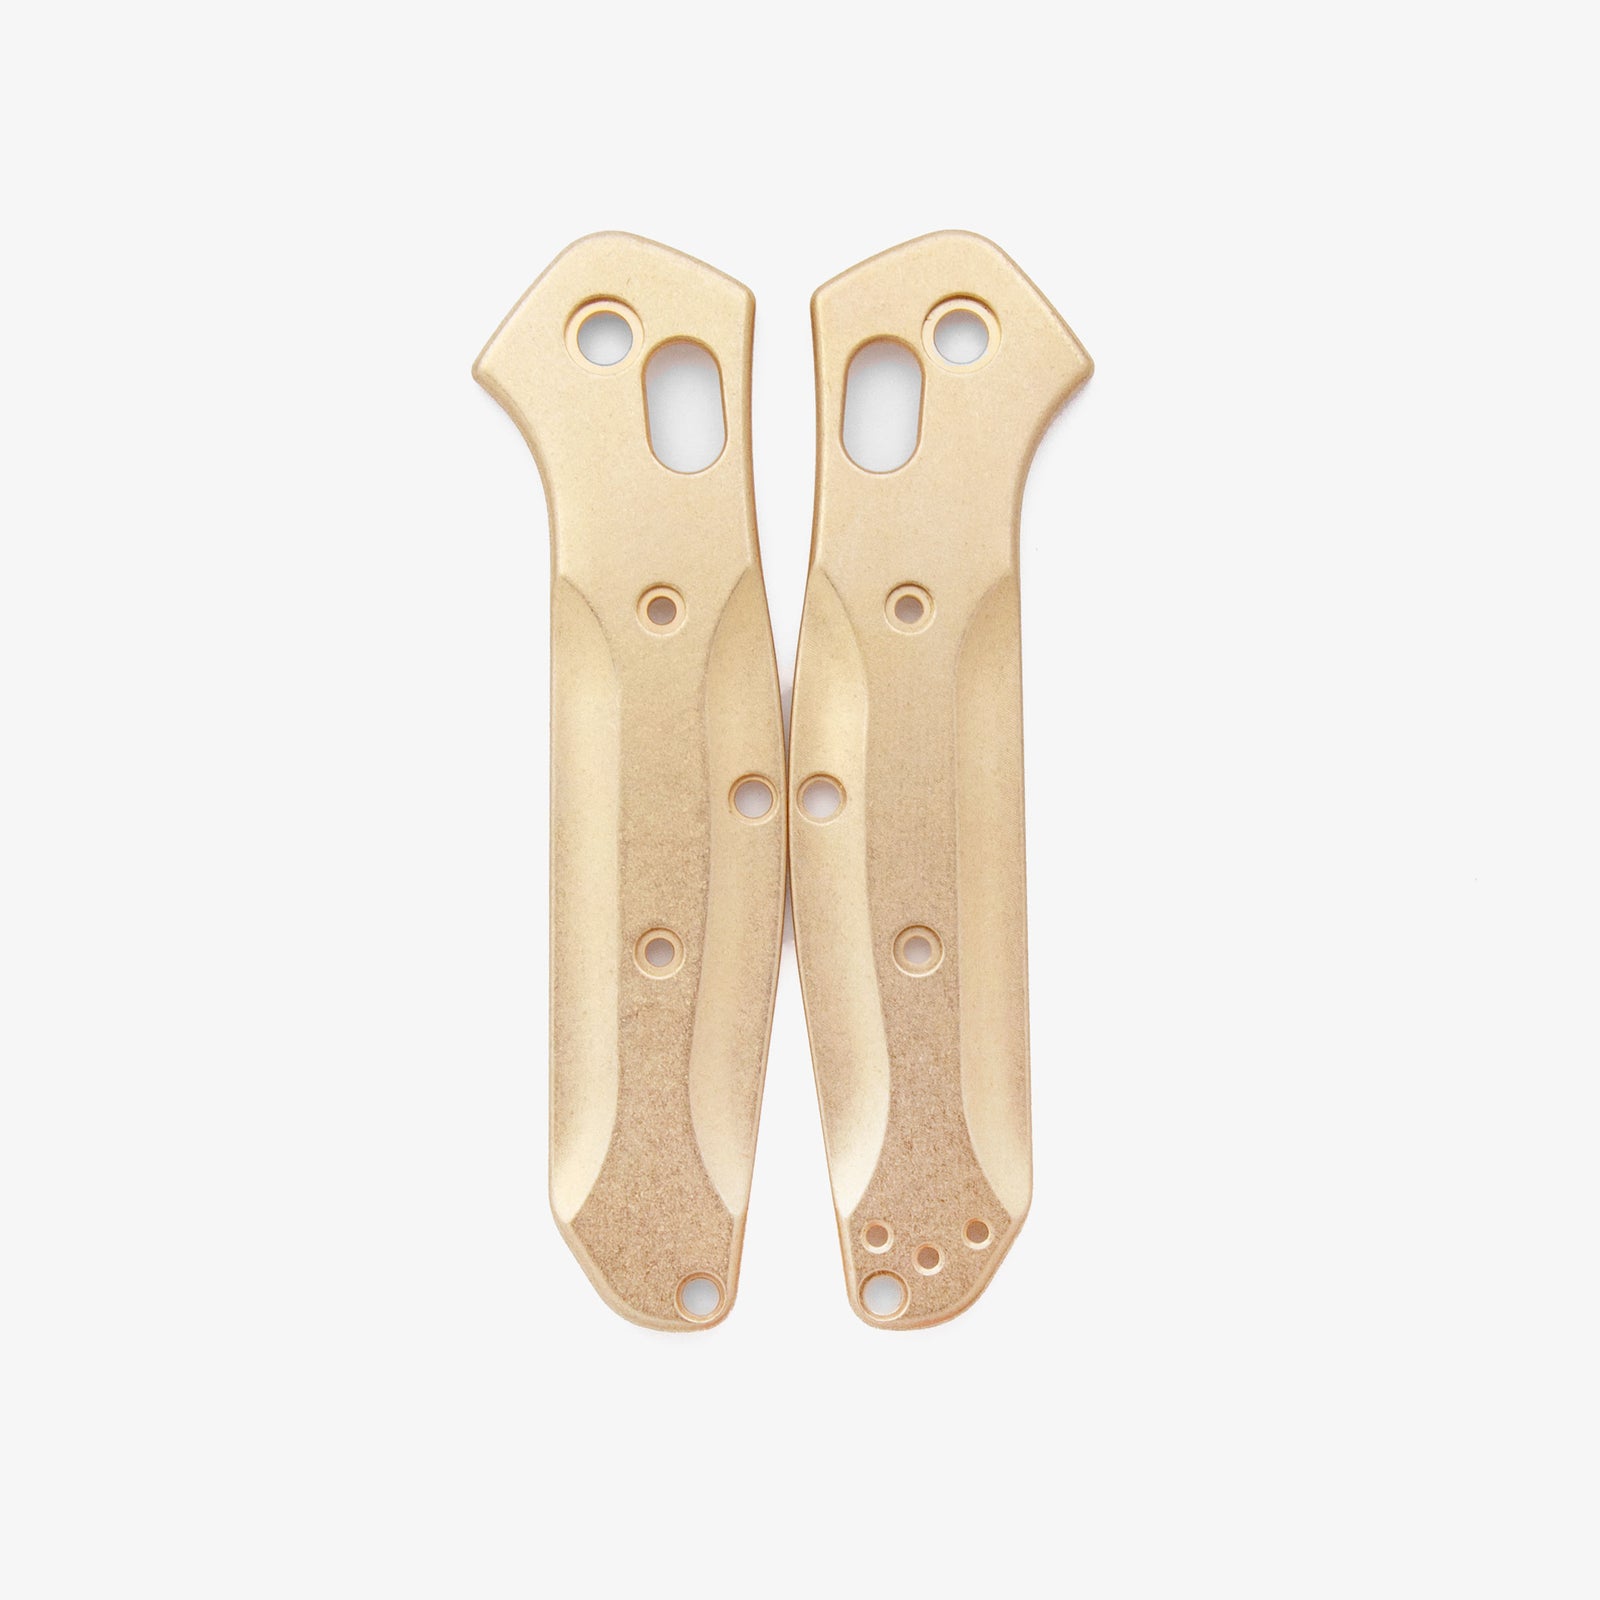 https://cdn.shopify.com/s/files/1/0624/9696/4860/products/benchmade-945-brass-scales-front_1600x.jpg?v=1689007664